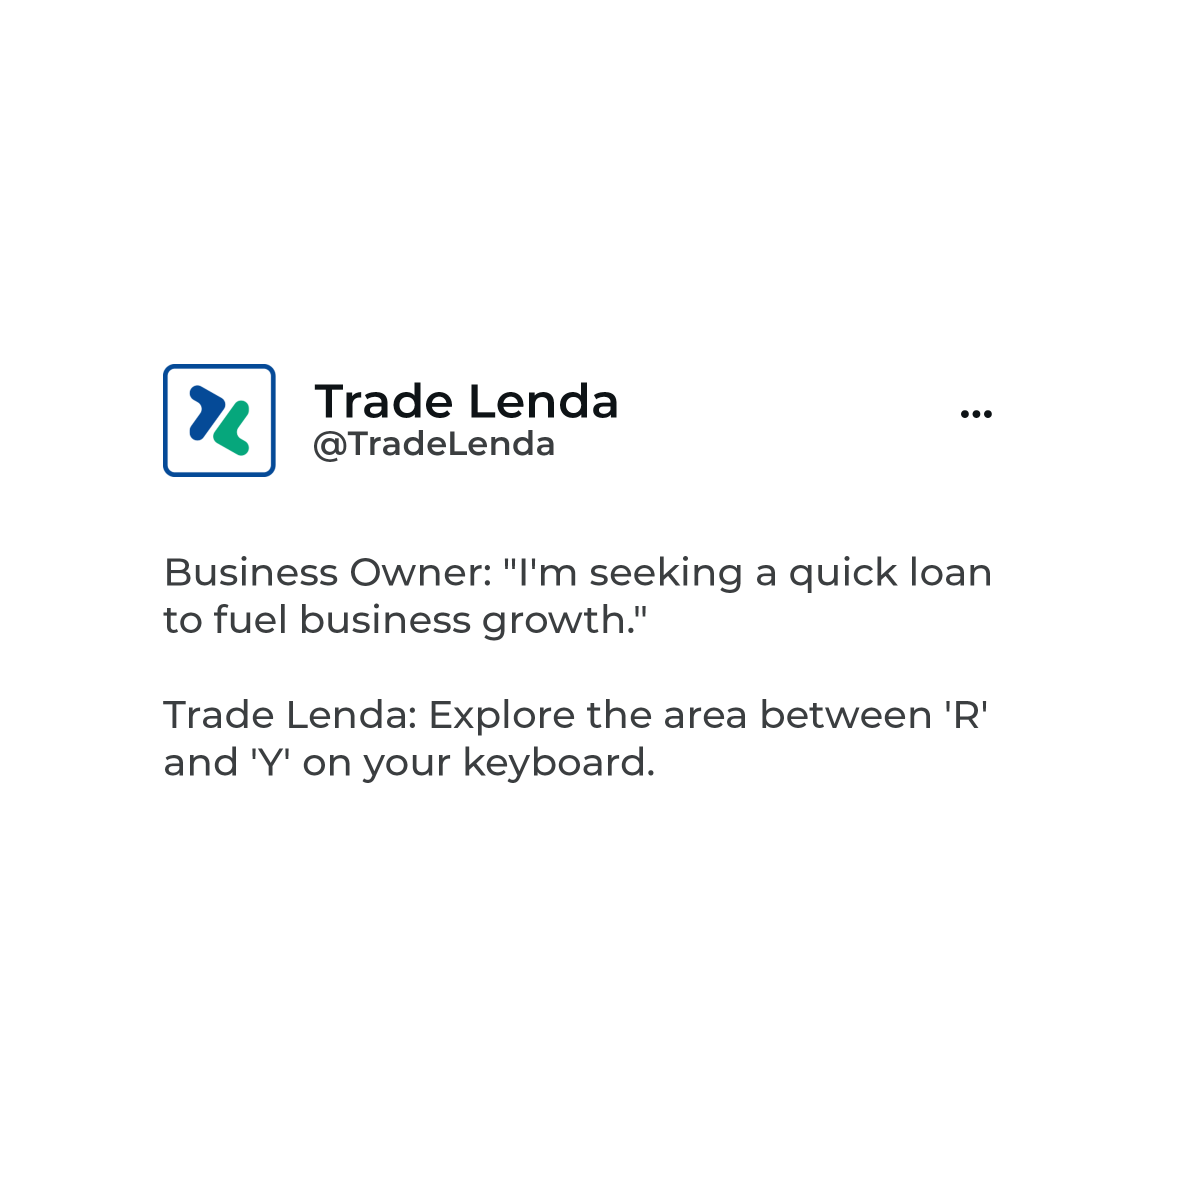 Need extra cash for unexpected expenses or big plans? Look no further! Trade Lenda's new Loan feature offers flexible, transparent borrowing options tailored to your needs. Apply Now! tradelenda.com/sign_up #TradeLenda #Loans